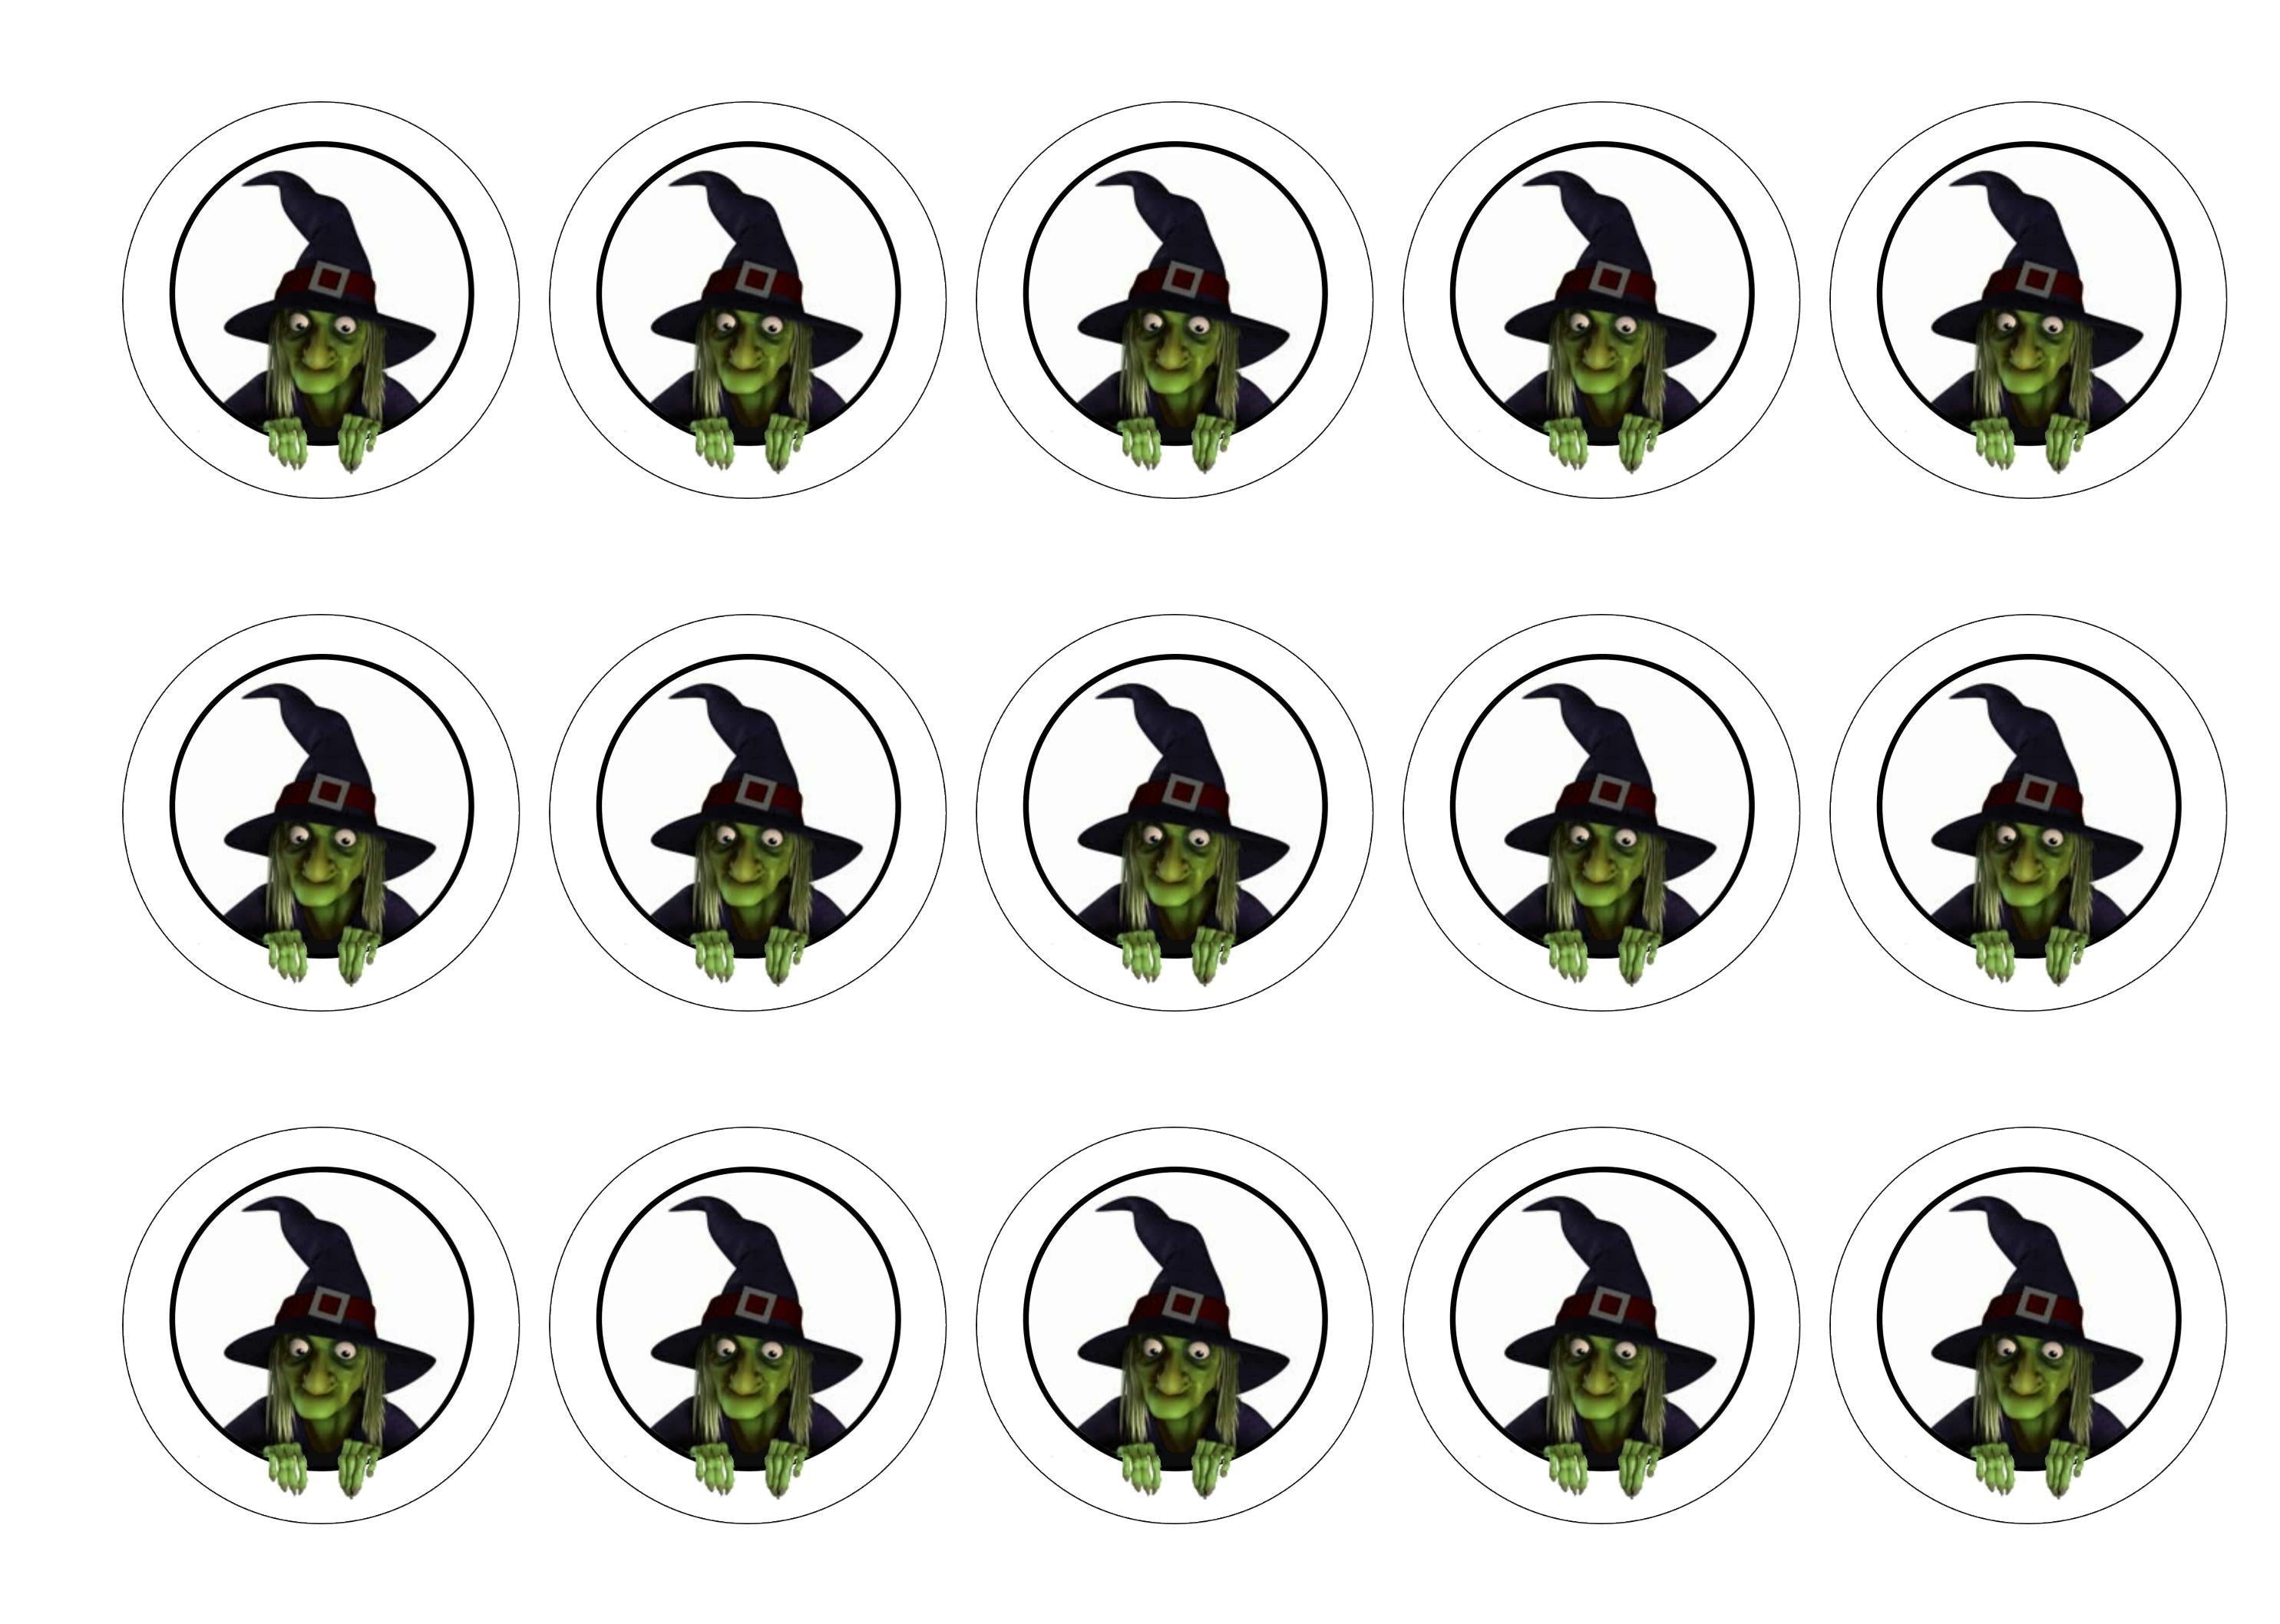 Printed edible cupcake toppers with Green Witch